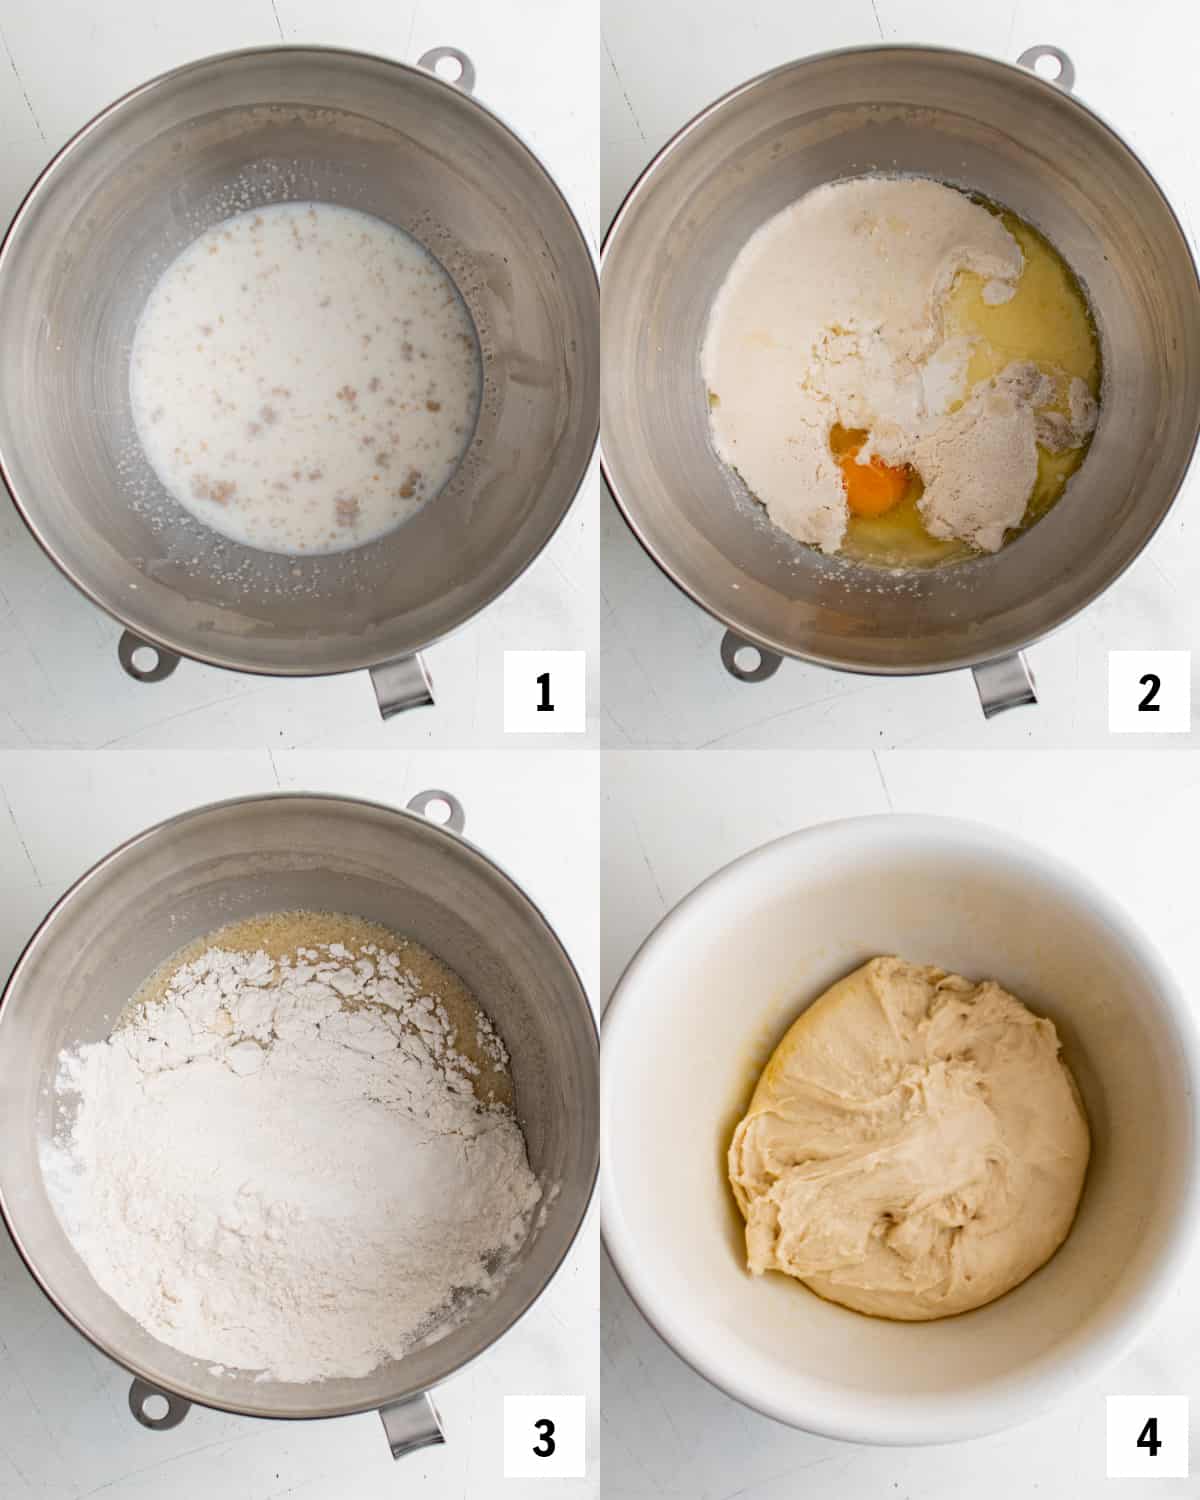 Mixing together the dough for beignets in a metal mixing bowl.